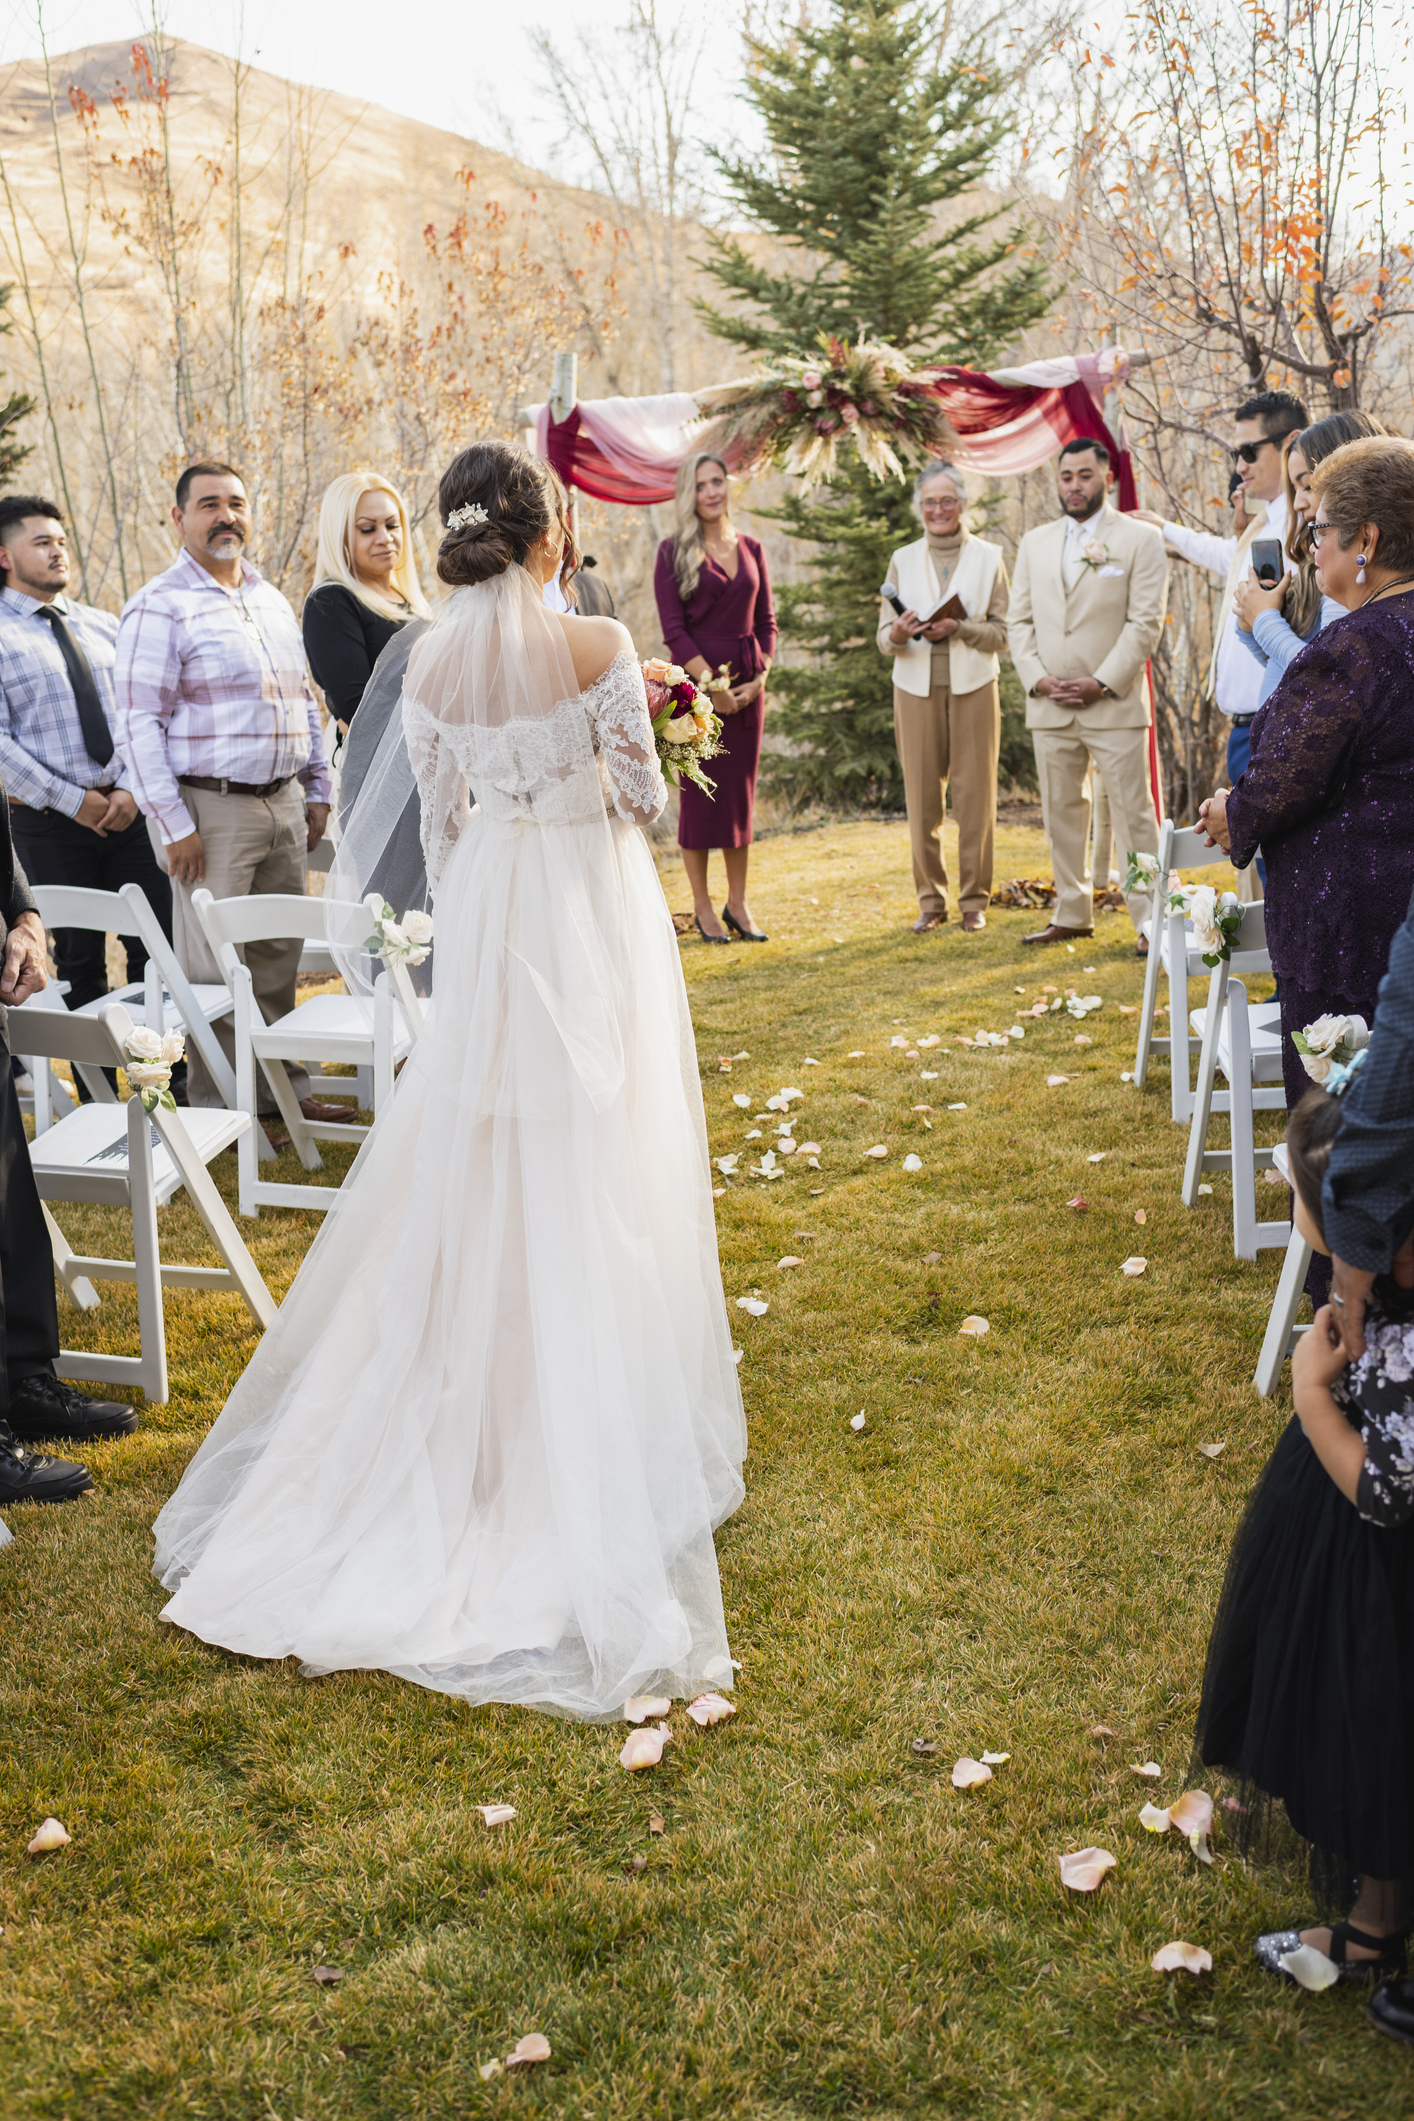 Bride in a flowing white dress holding a bouquet walks down the aisle at an outdoor wedding ceremony with guests on either side